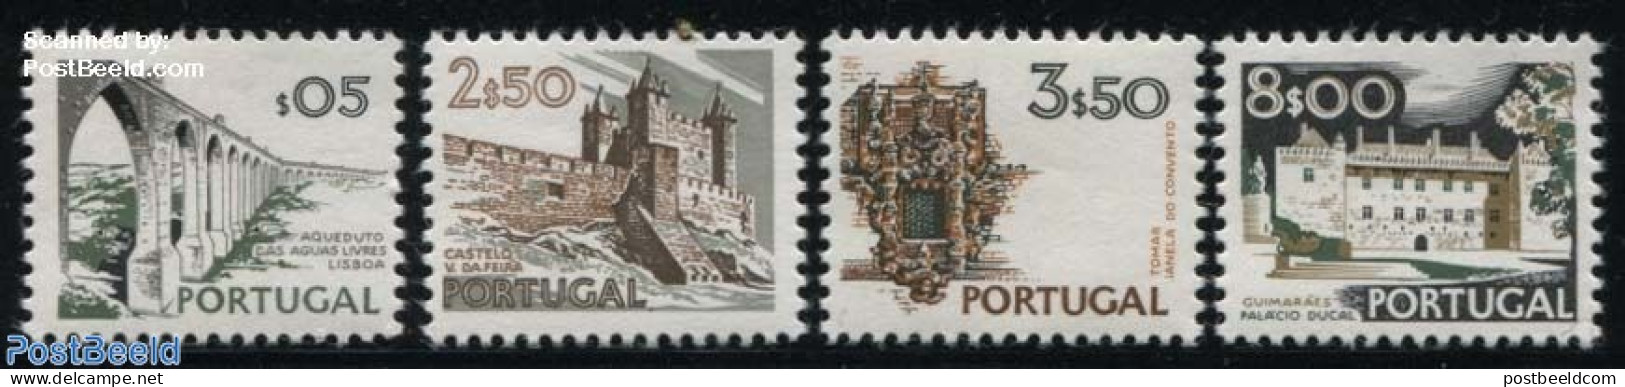 Portugal 1973 Definitives 4v, Normal Paper, Mint NH, Art - Bridges And Tunnels - Castles & Fortifications - Unused Stamps